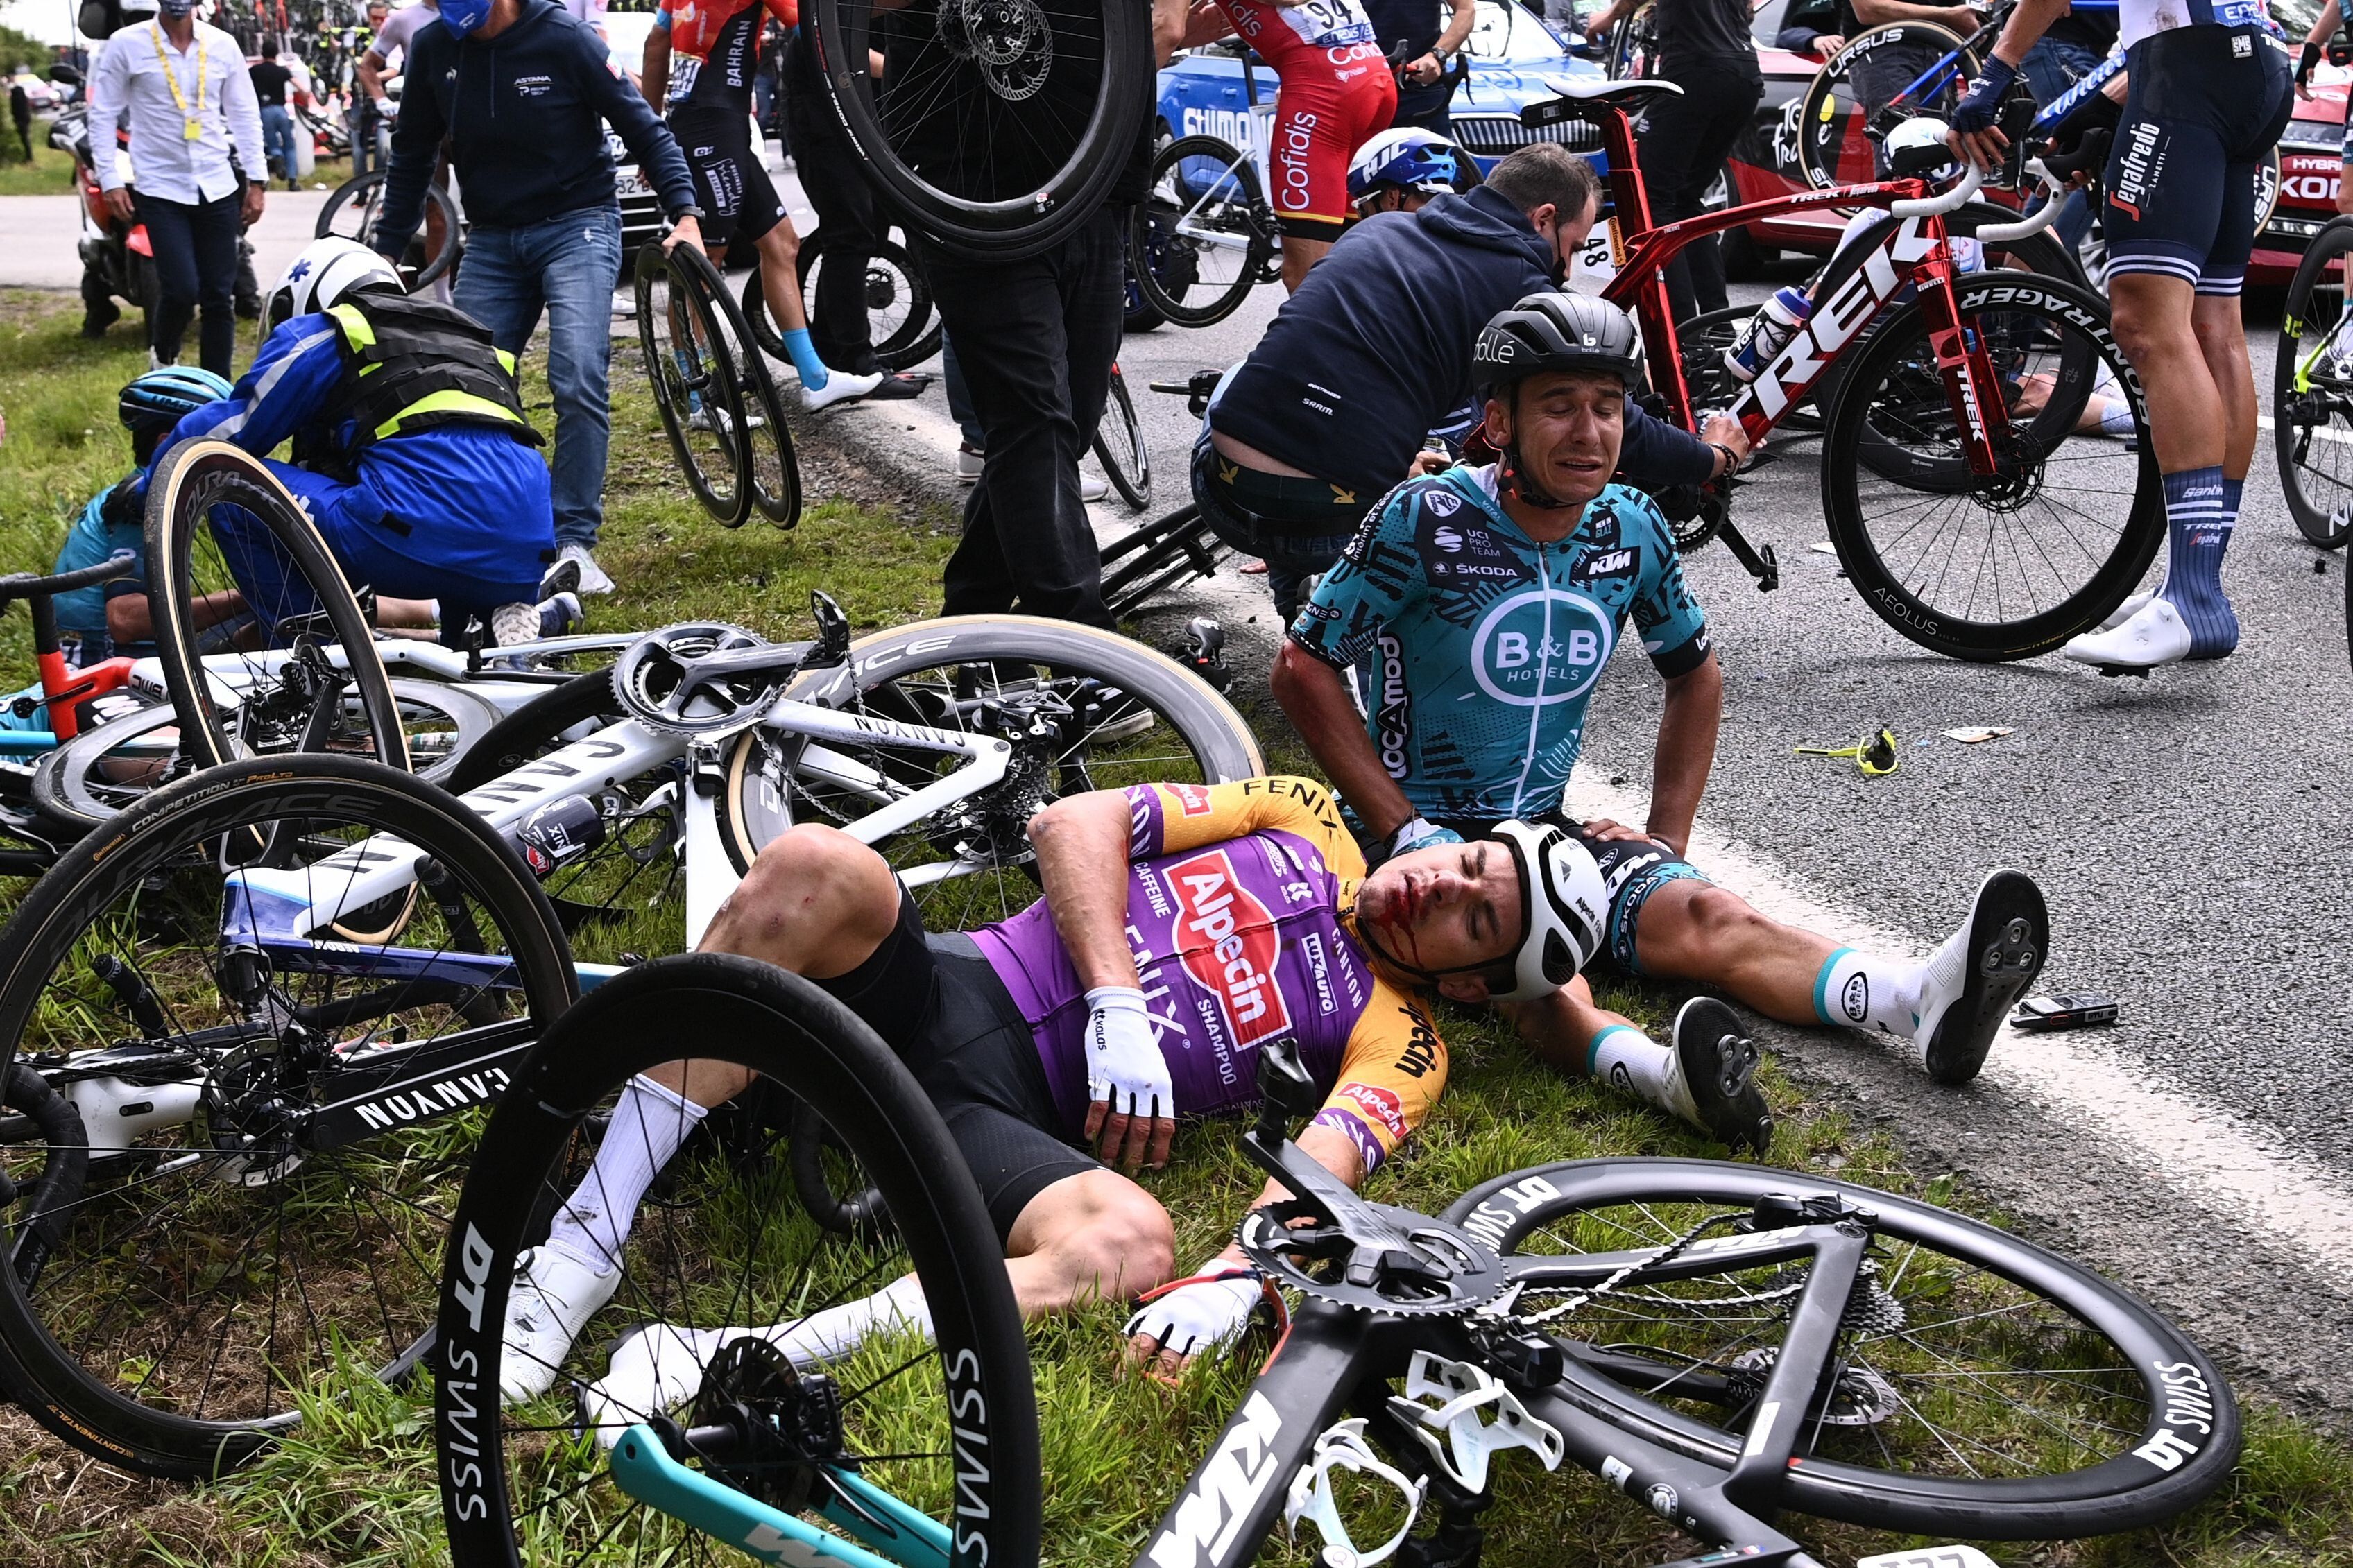 Two cyclists lie on the ground after crashing during the 1st stage of the 108th edition of the Tour de France cycling race on